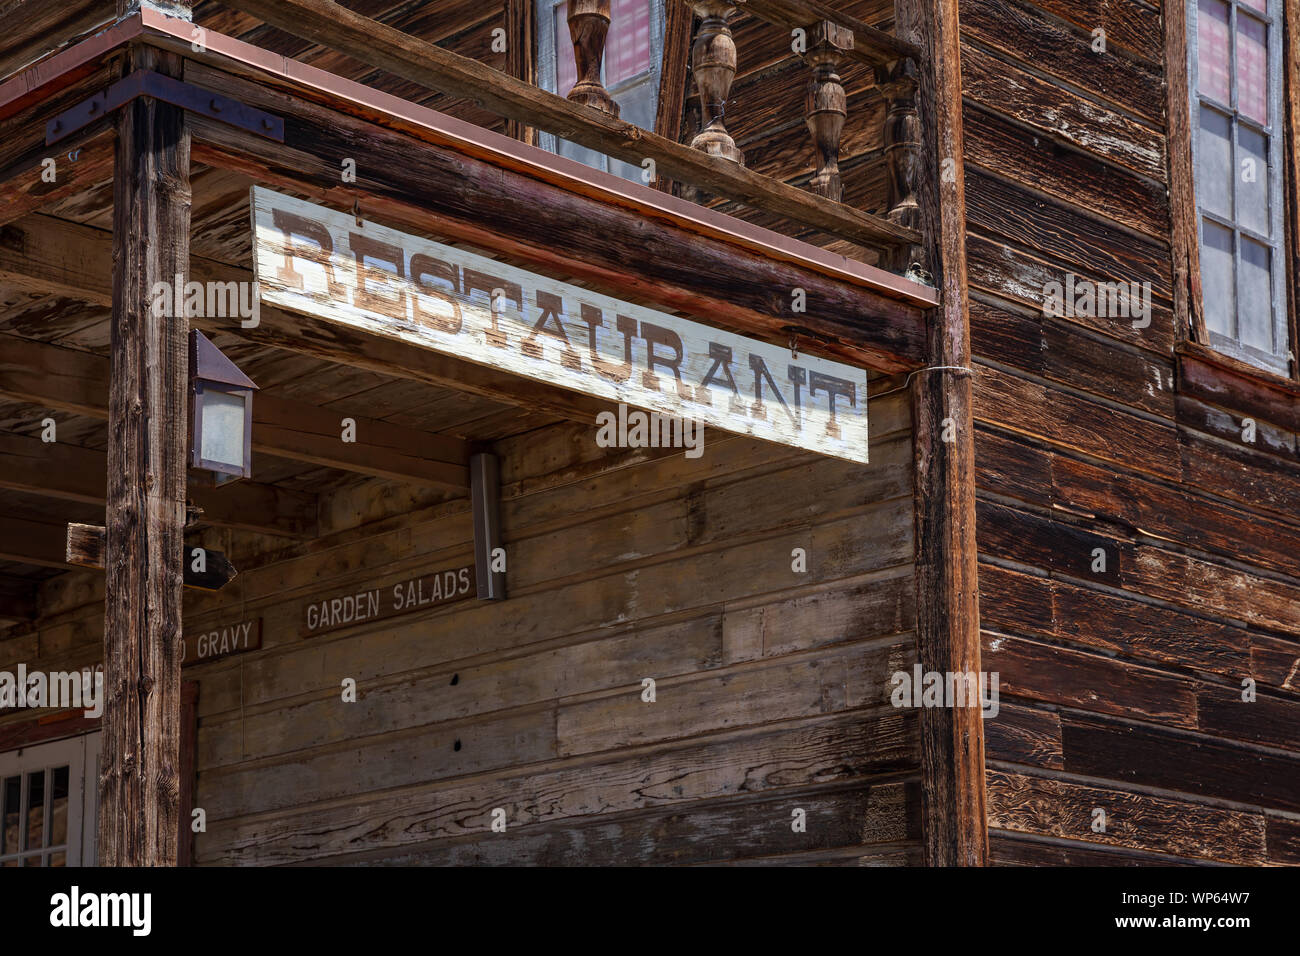 Calico ghost town California, USA. May 29, 2019. Calico restaurant sign on wood building facade Stock Photo